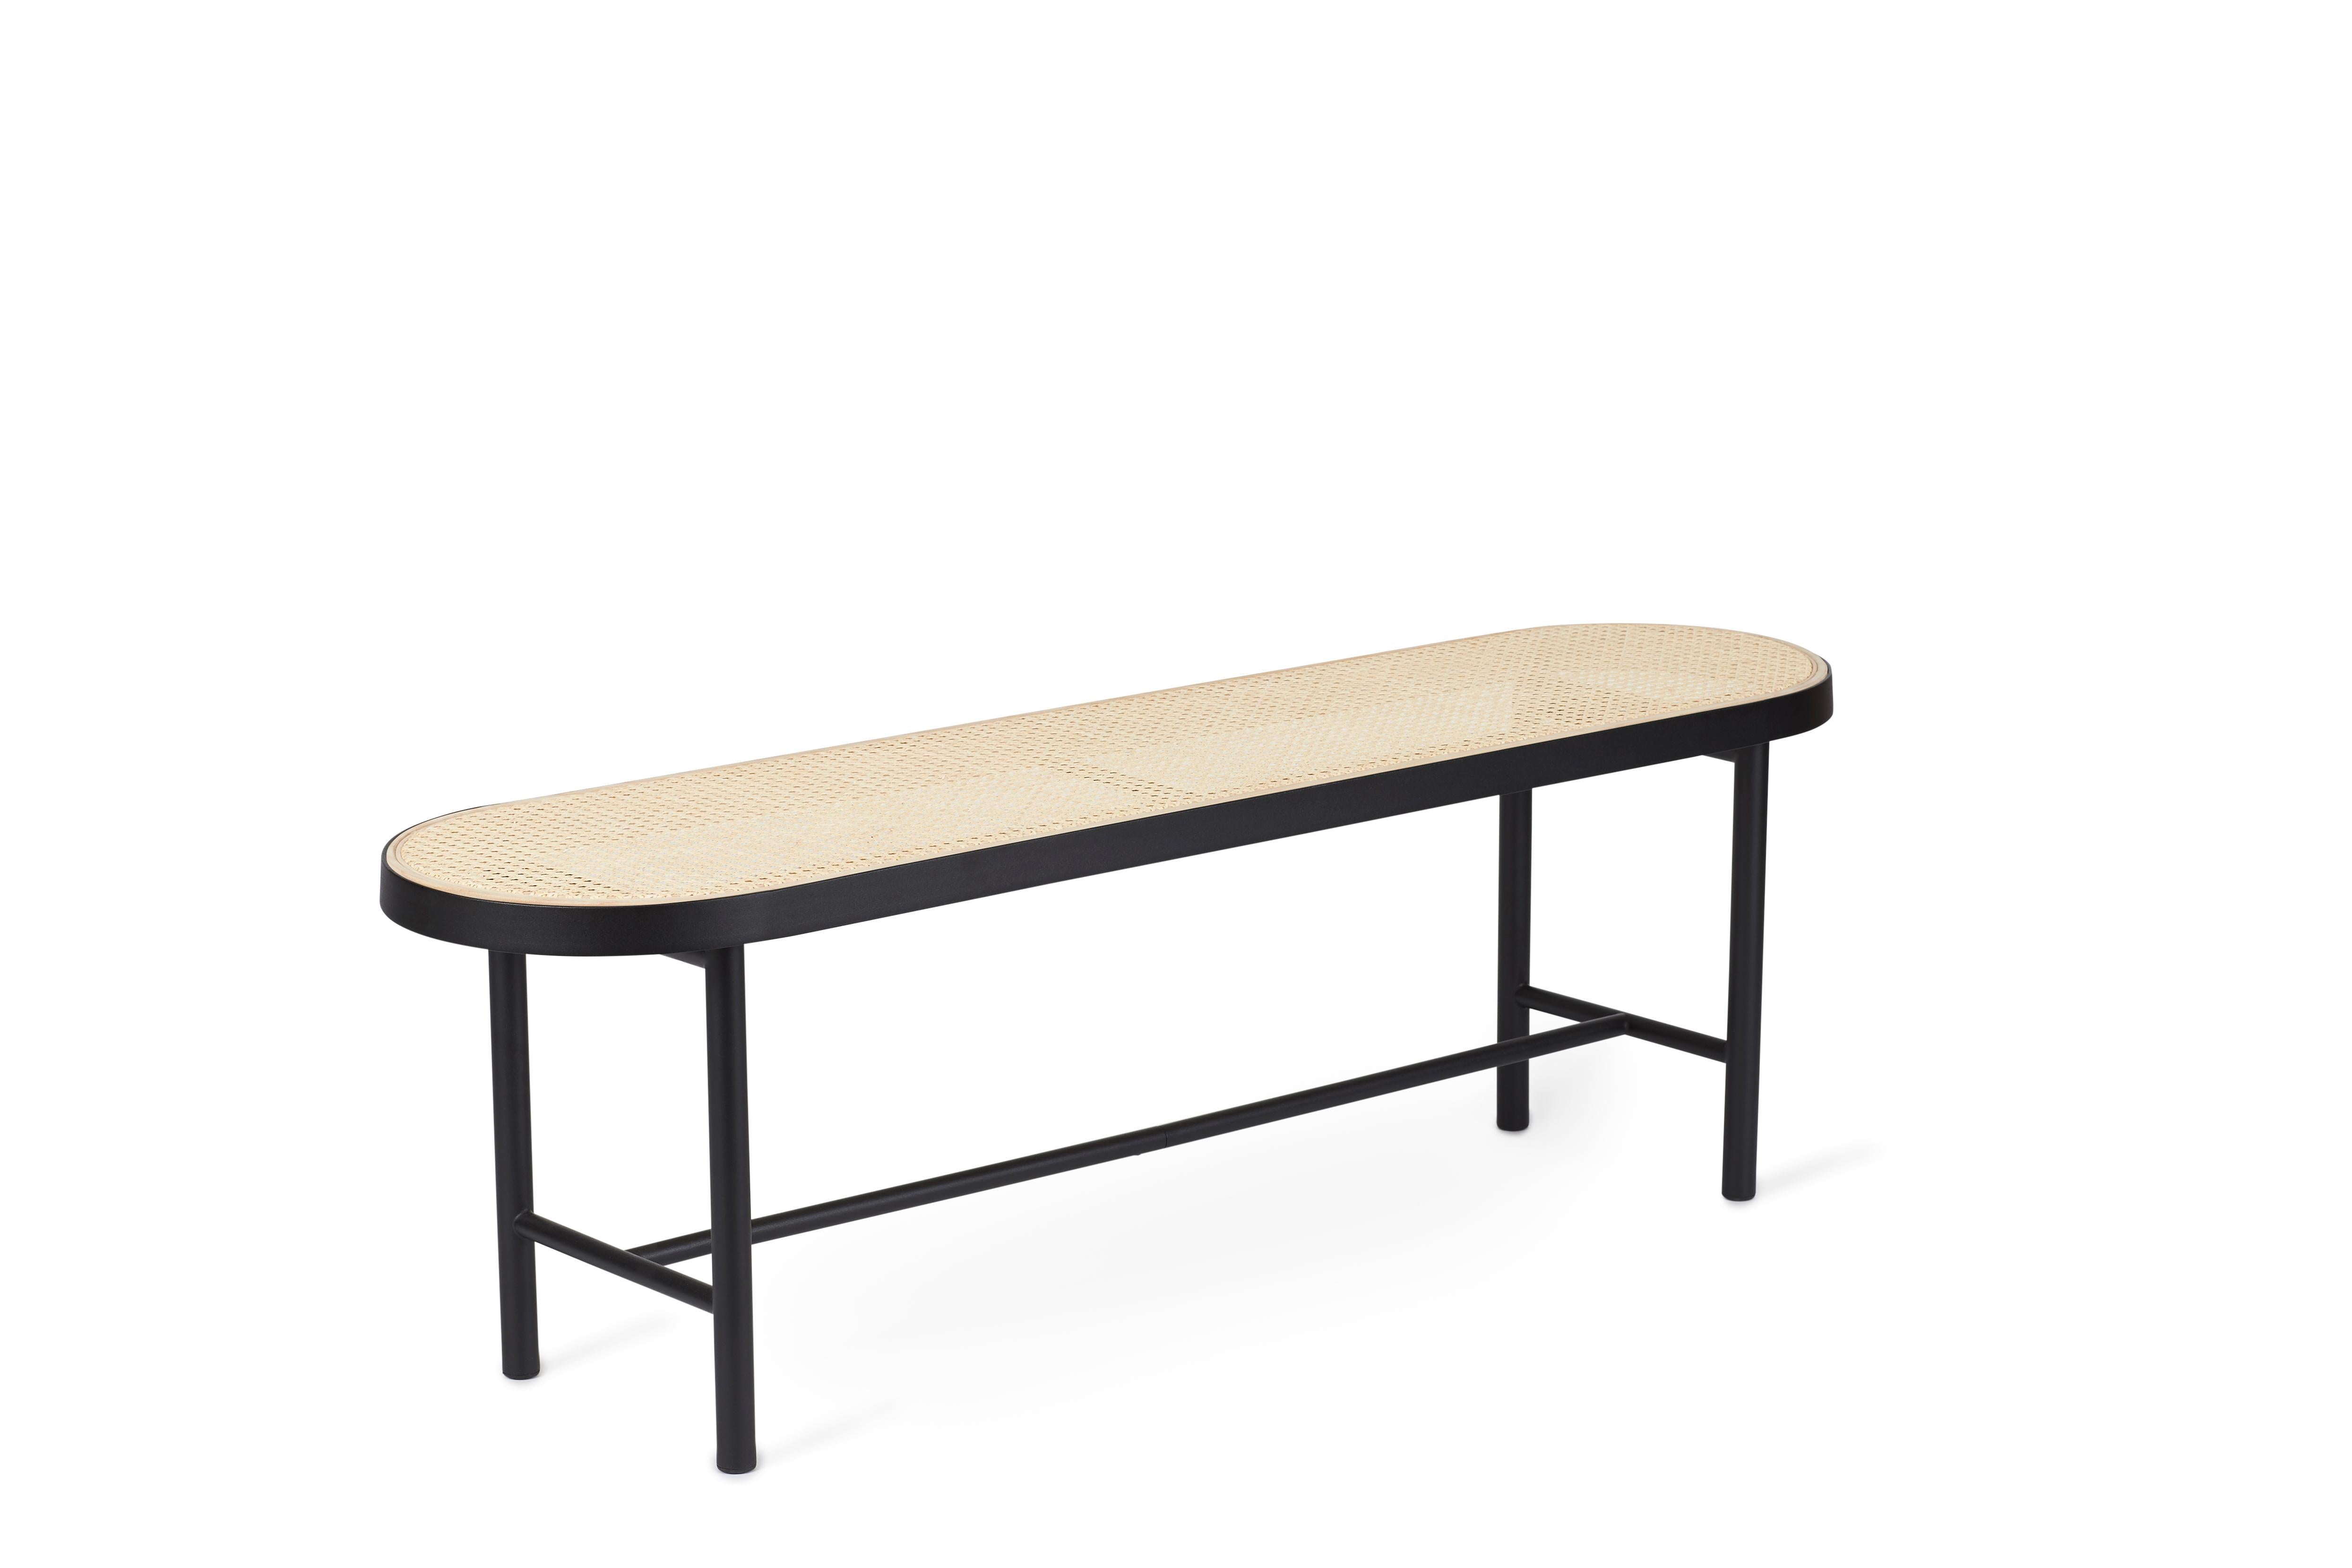 For Sale: Black (Cane / Black) Be My Guest Bench, by Charlotte Høncke from Warm Nordic